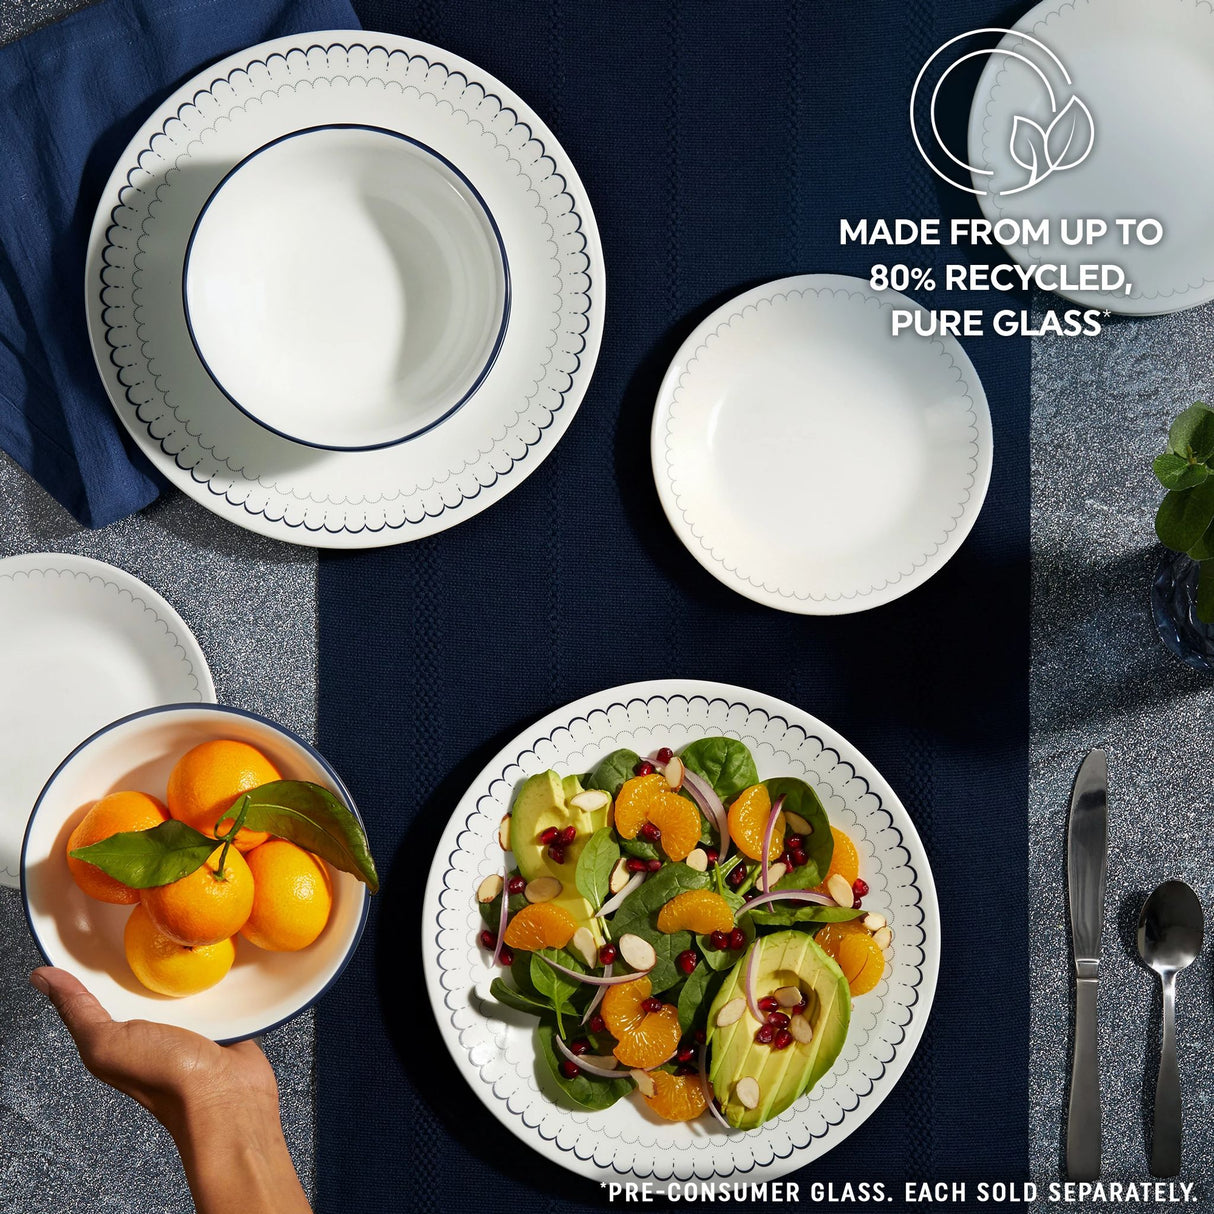  Caspian Lace dinnerware on tabletop with text made from up to 80% recycled pure glass